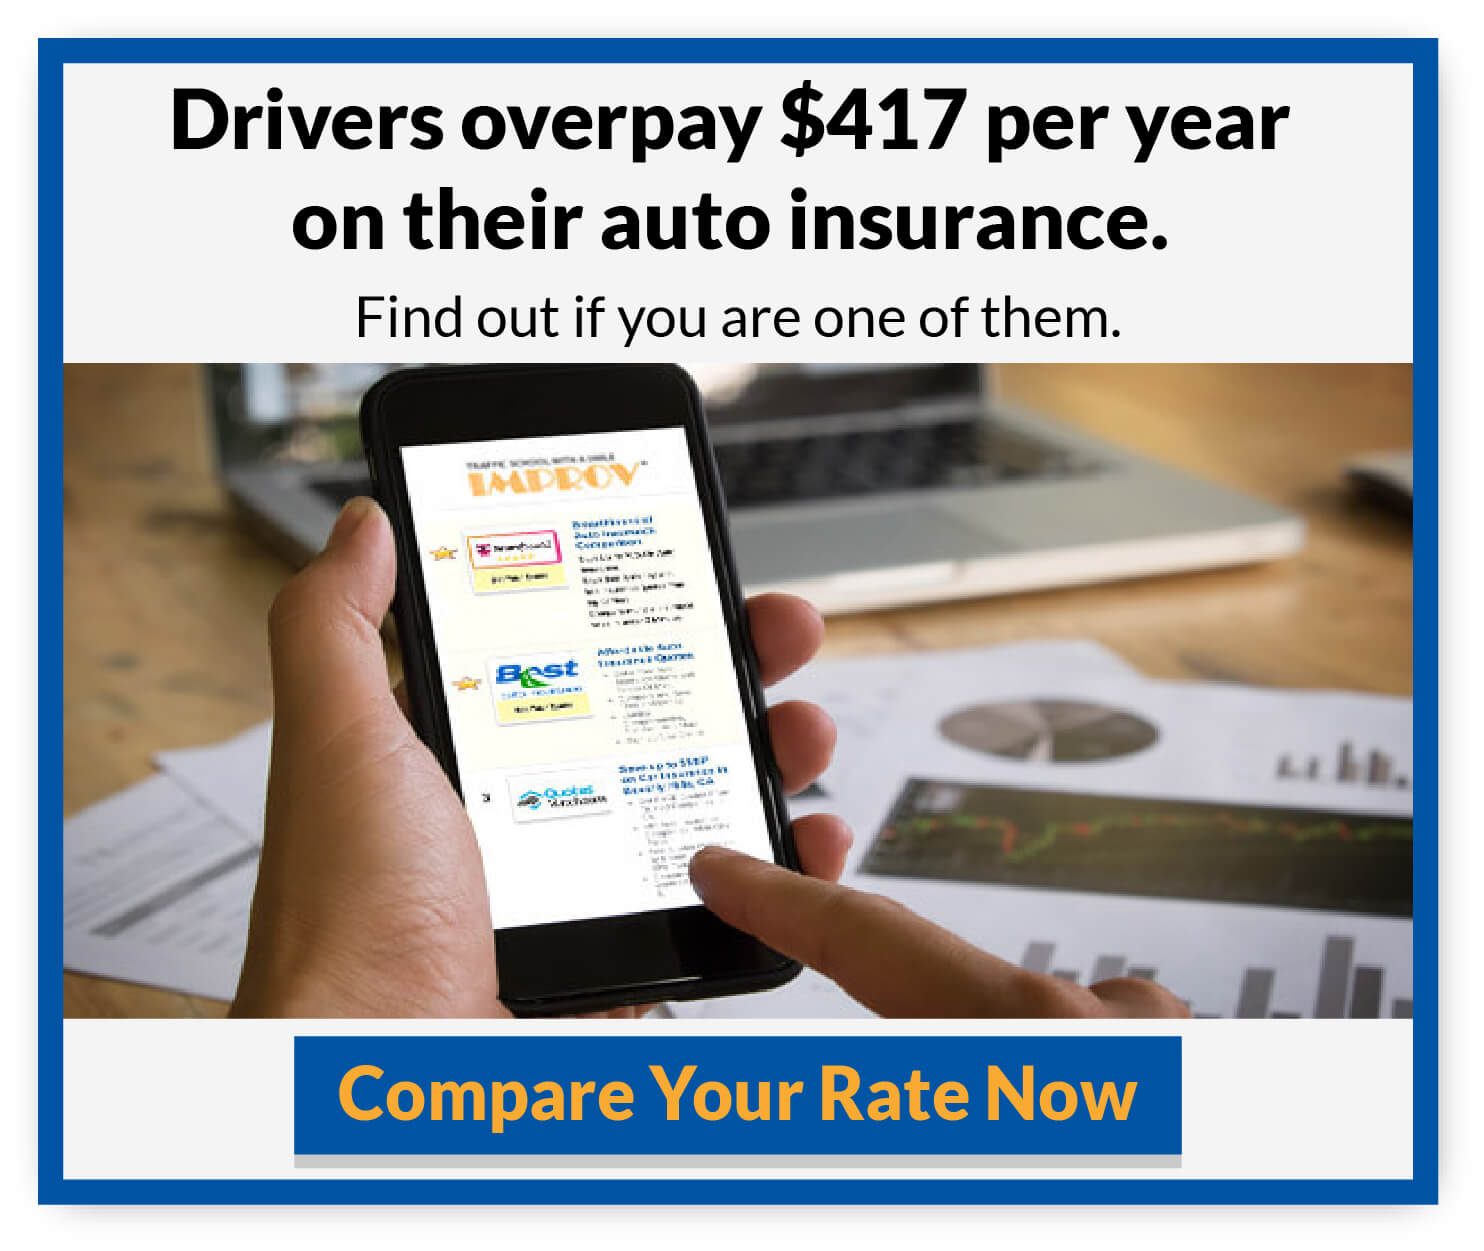 Drivers overpay on insurance rates. Compare your rate now. Click here.